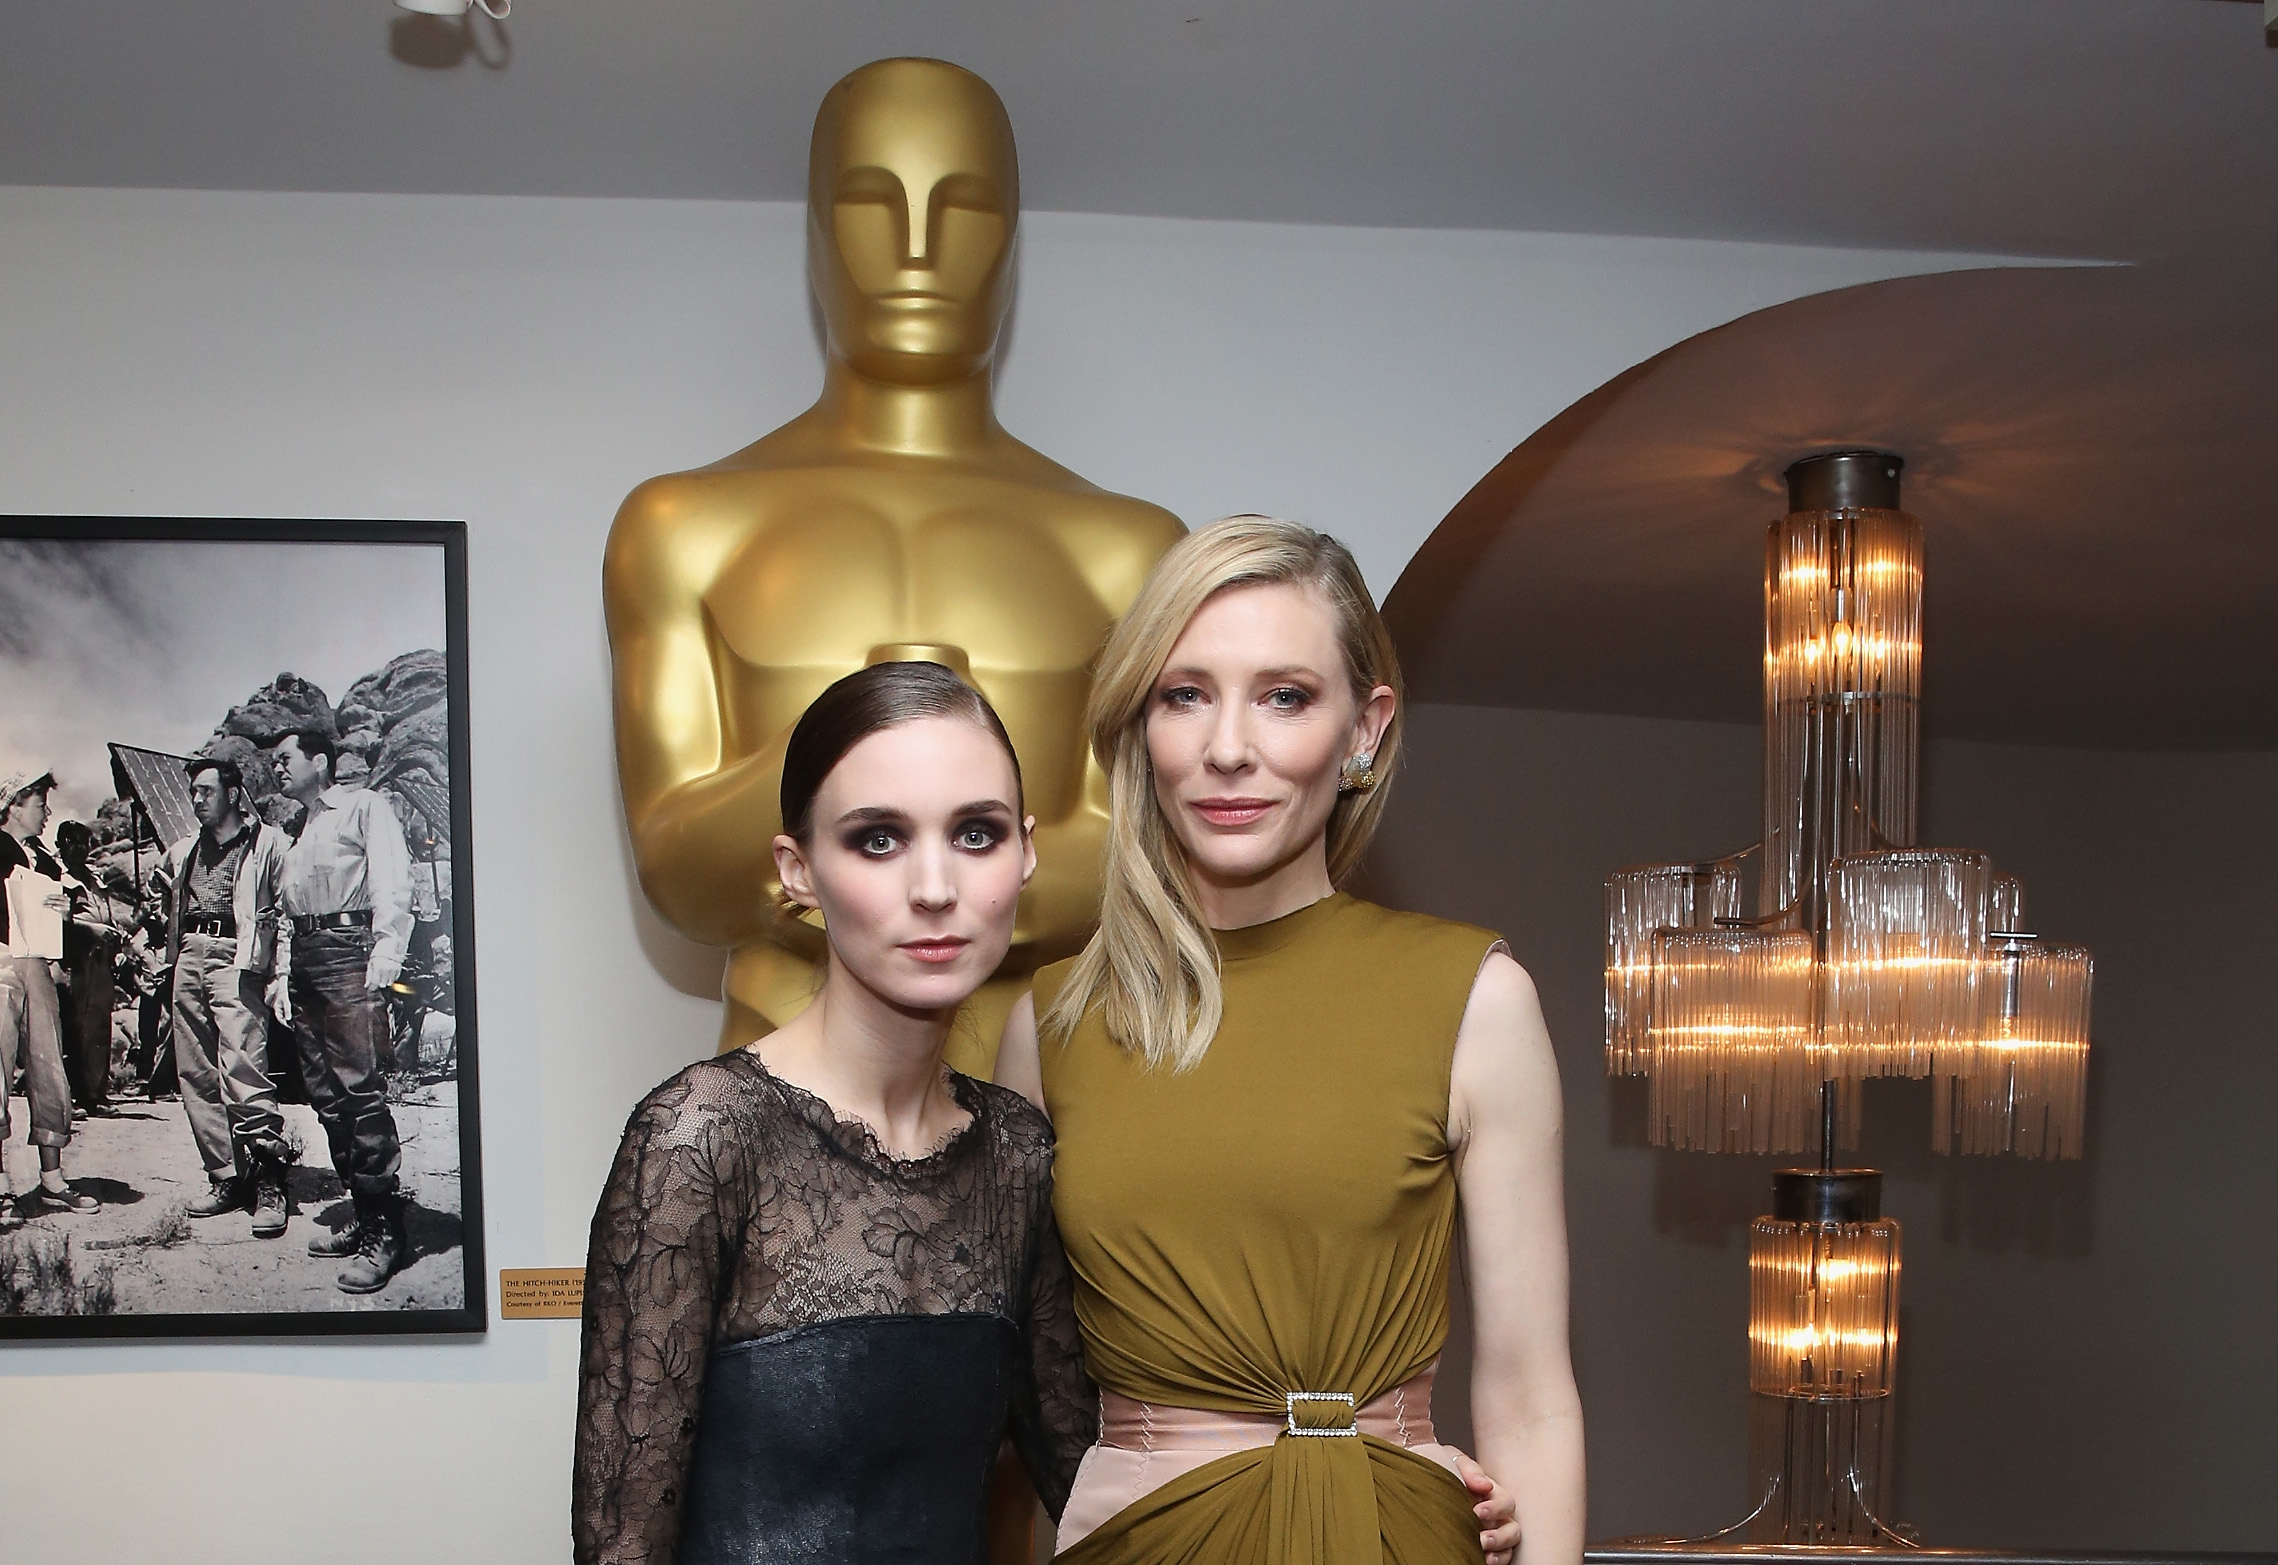 NEW YORK, NY - NOVEMBER 16: Rooney Mara (L) and Cate Blanchett attends The Academy Of Motion Picture Arts And Sciences Hosts An Official Academy Screening Of CAROL on November 16, 2015 in New York City. (Photo by Robin Marchant/Getty Images for Academy of Motion Picture Arts and Sciences)